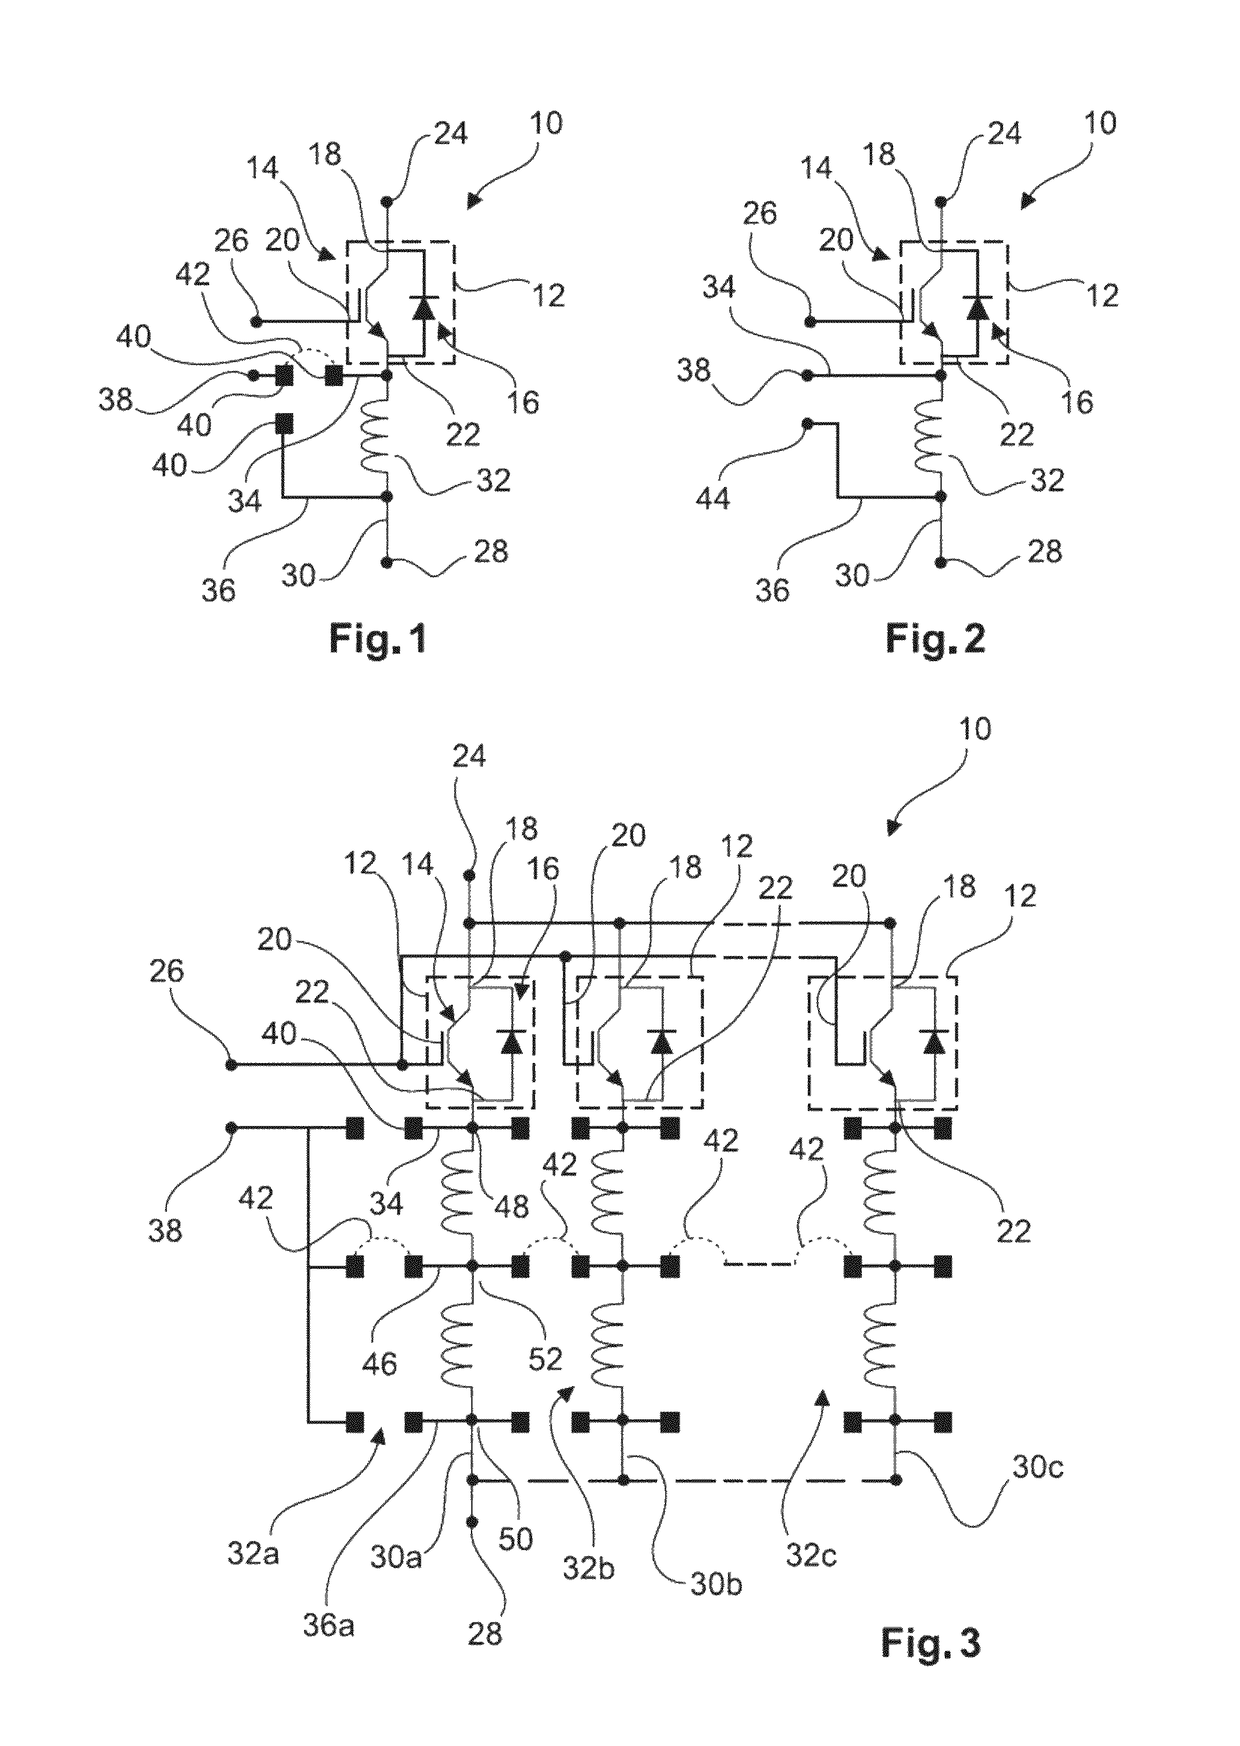 Semiconductor module with two auxiliary emitter conductor paths